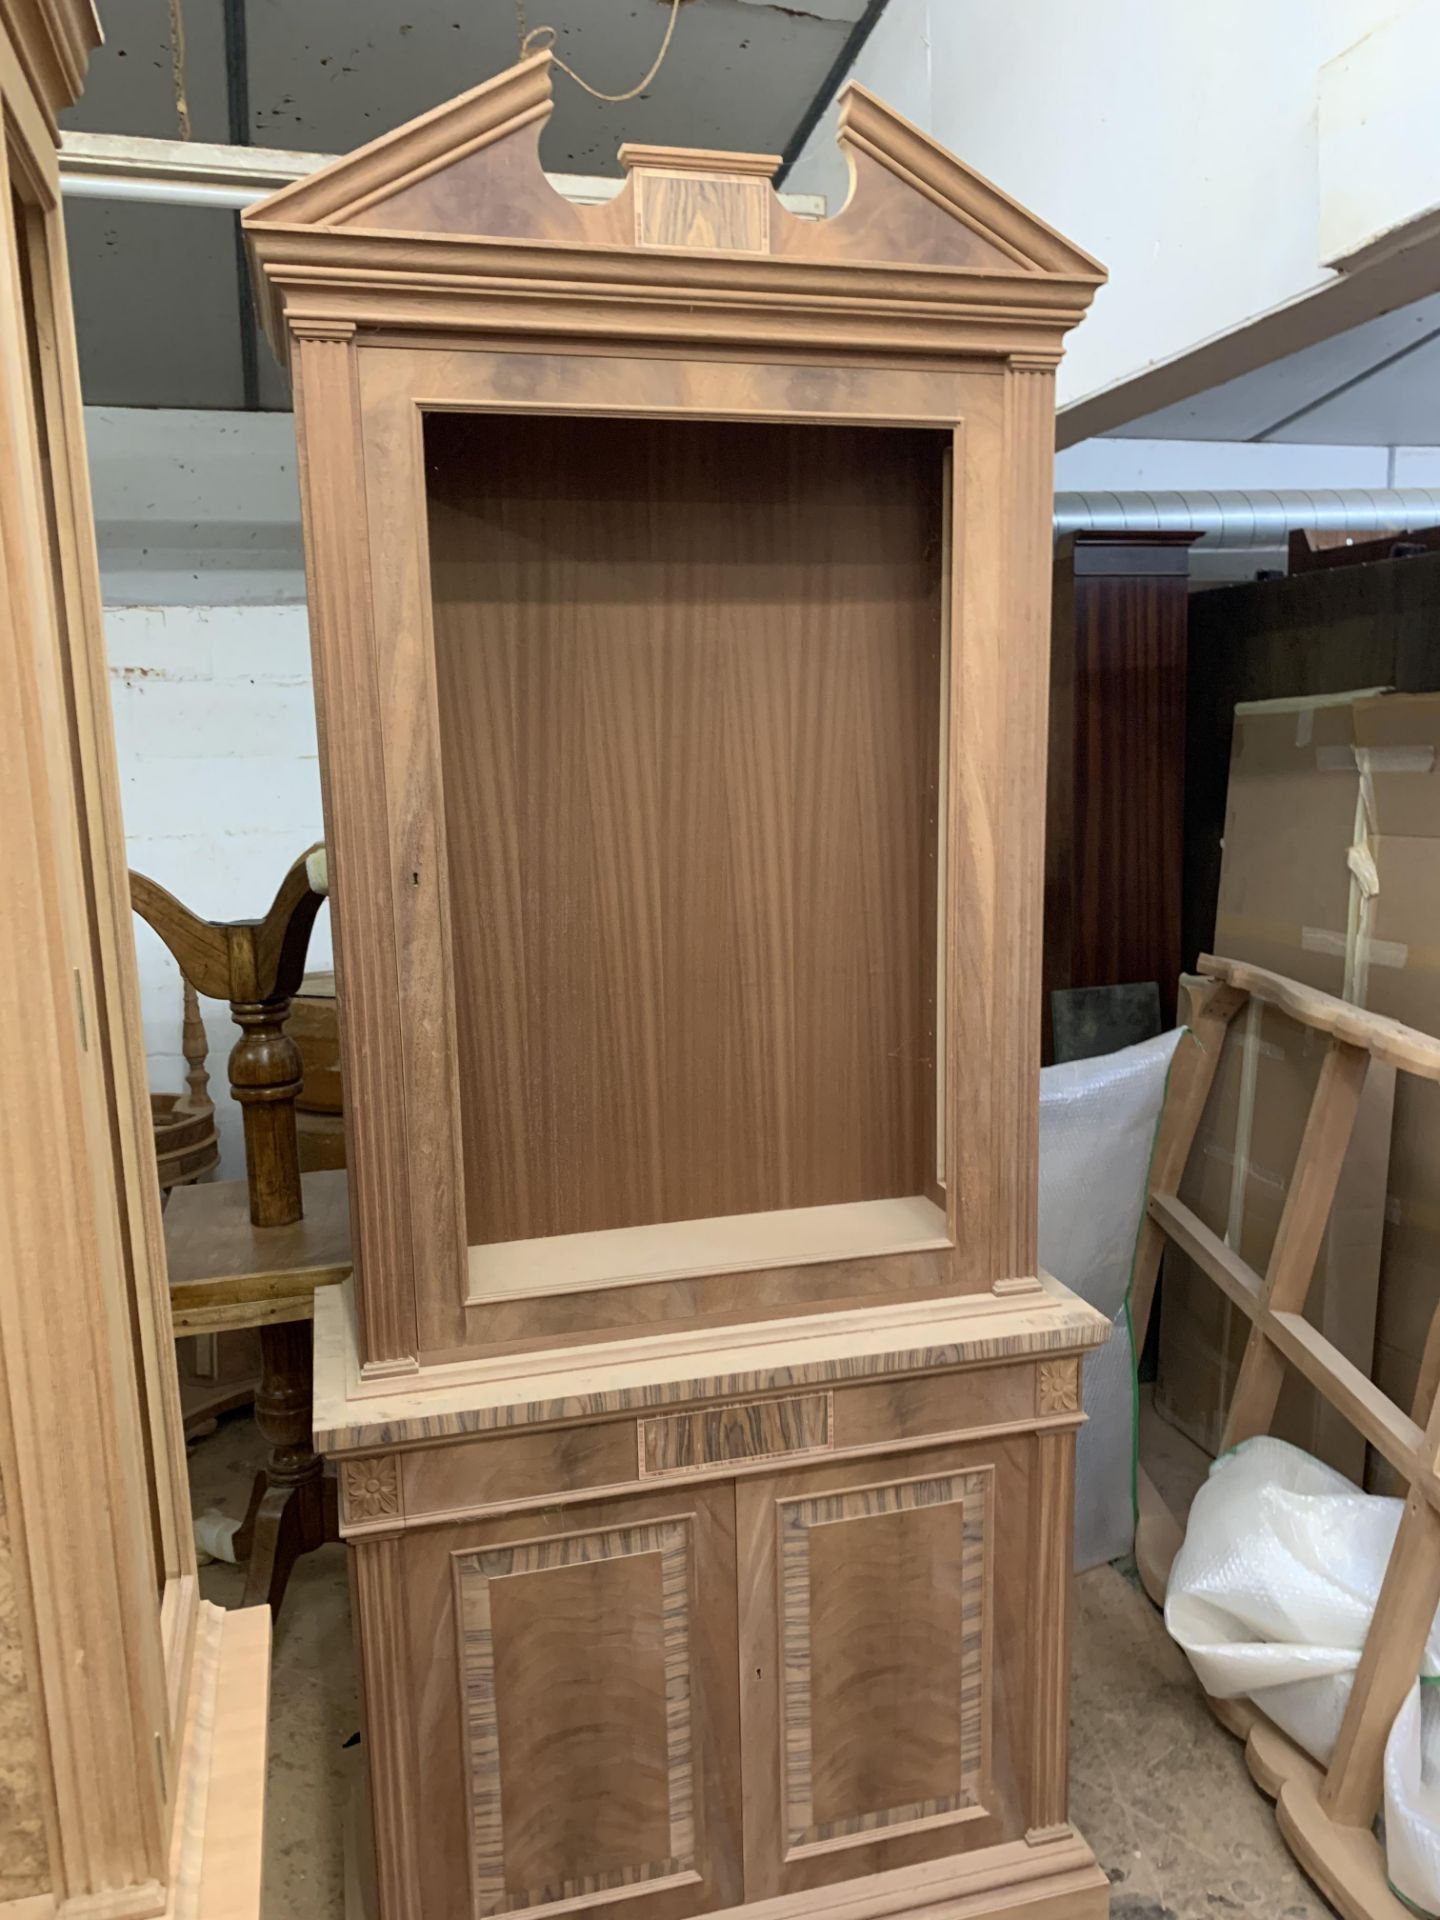 Two-door tall Bookcase, in mahogany finish, from the Corinthian range, requires finishing/polishing.